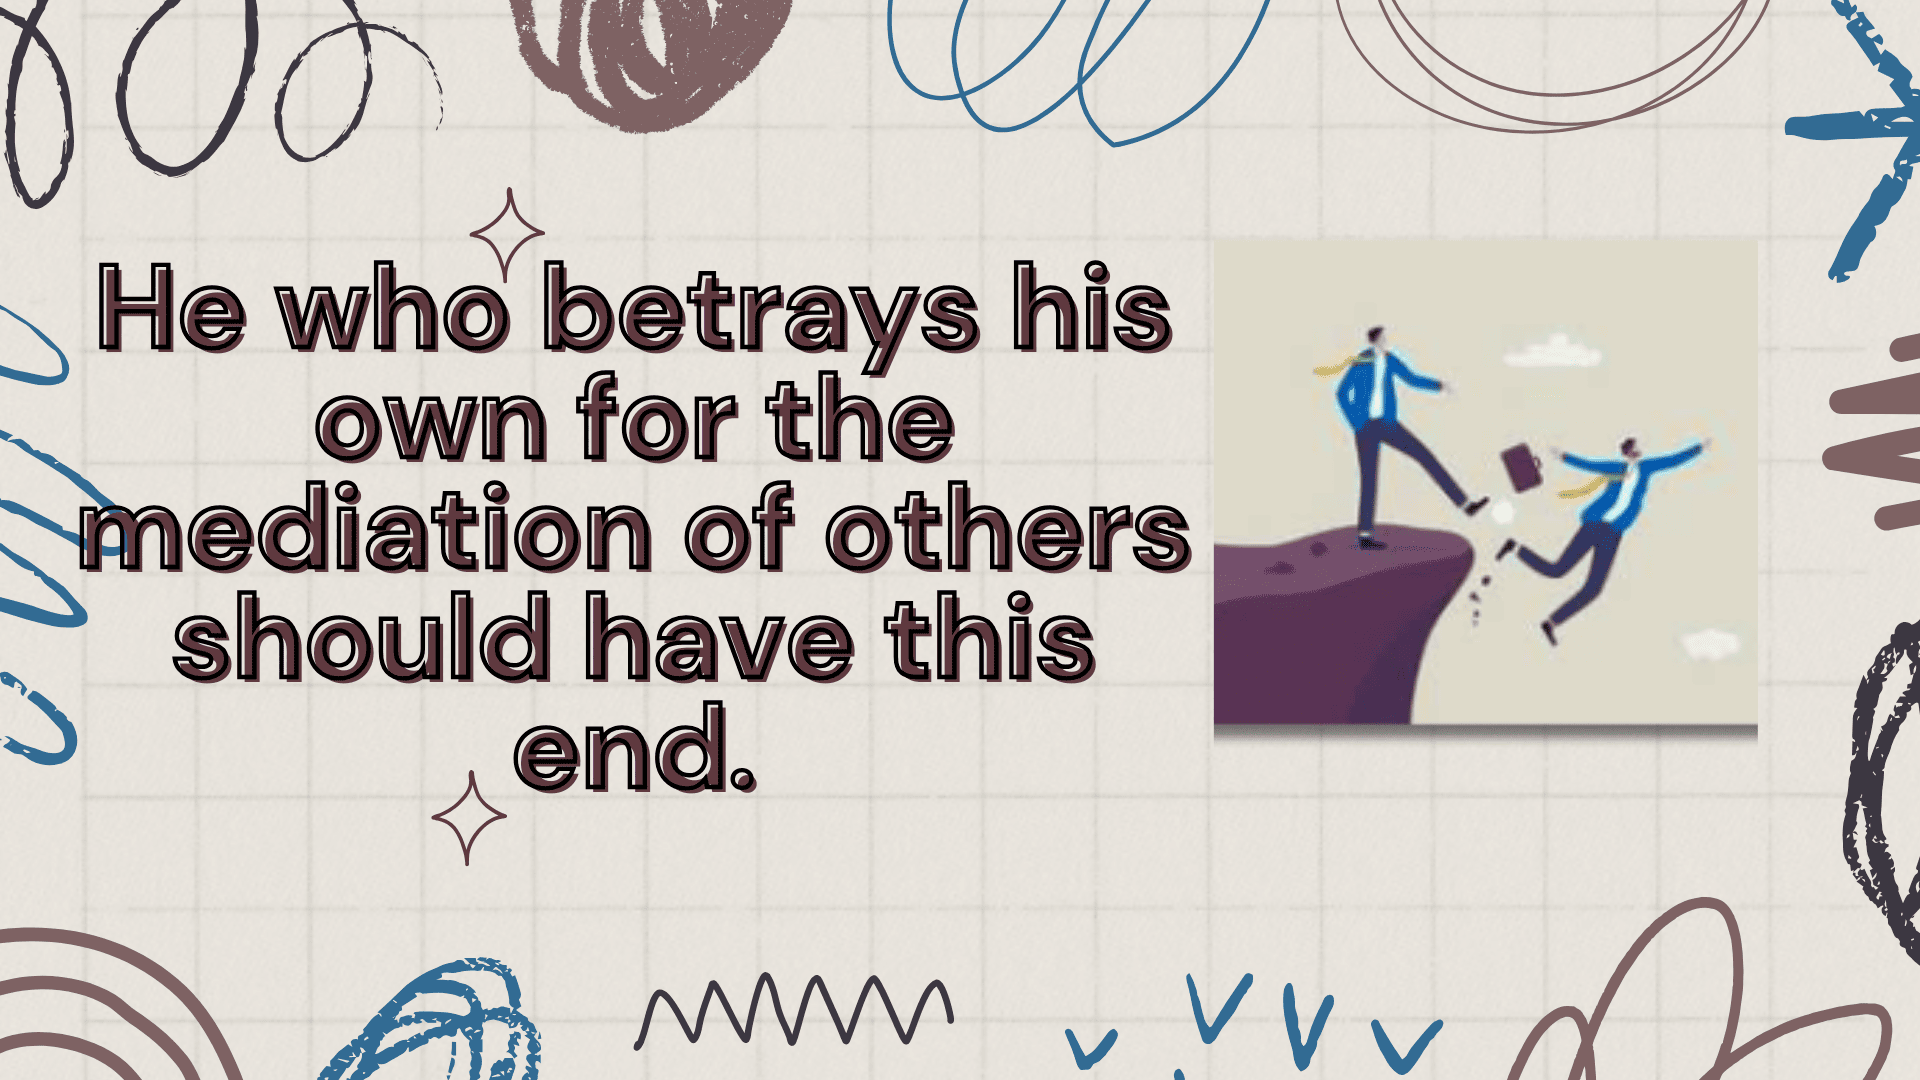 He who betrays his own for the mediation of others should have this end.